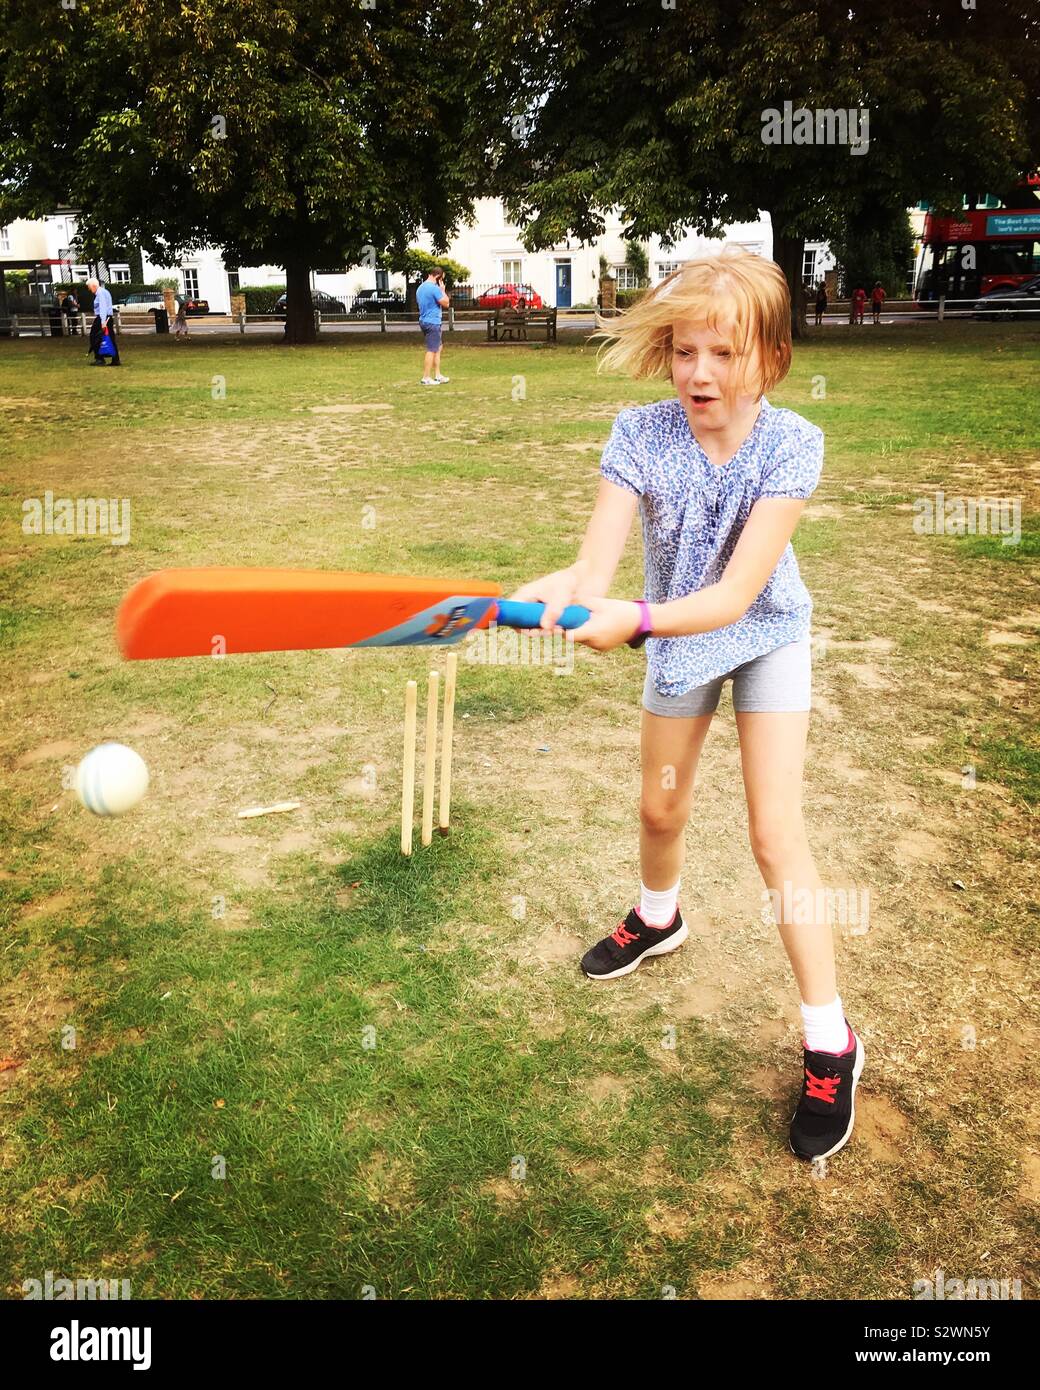 Nine year old girl / child plays cricket on the village green in a game of childrens cricket with other kids Stock Photo